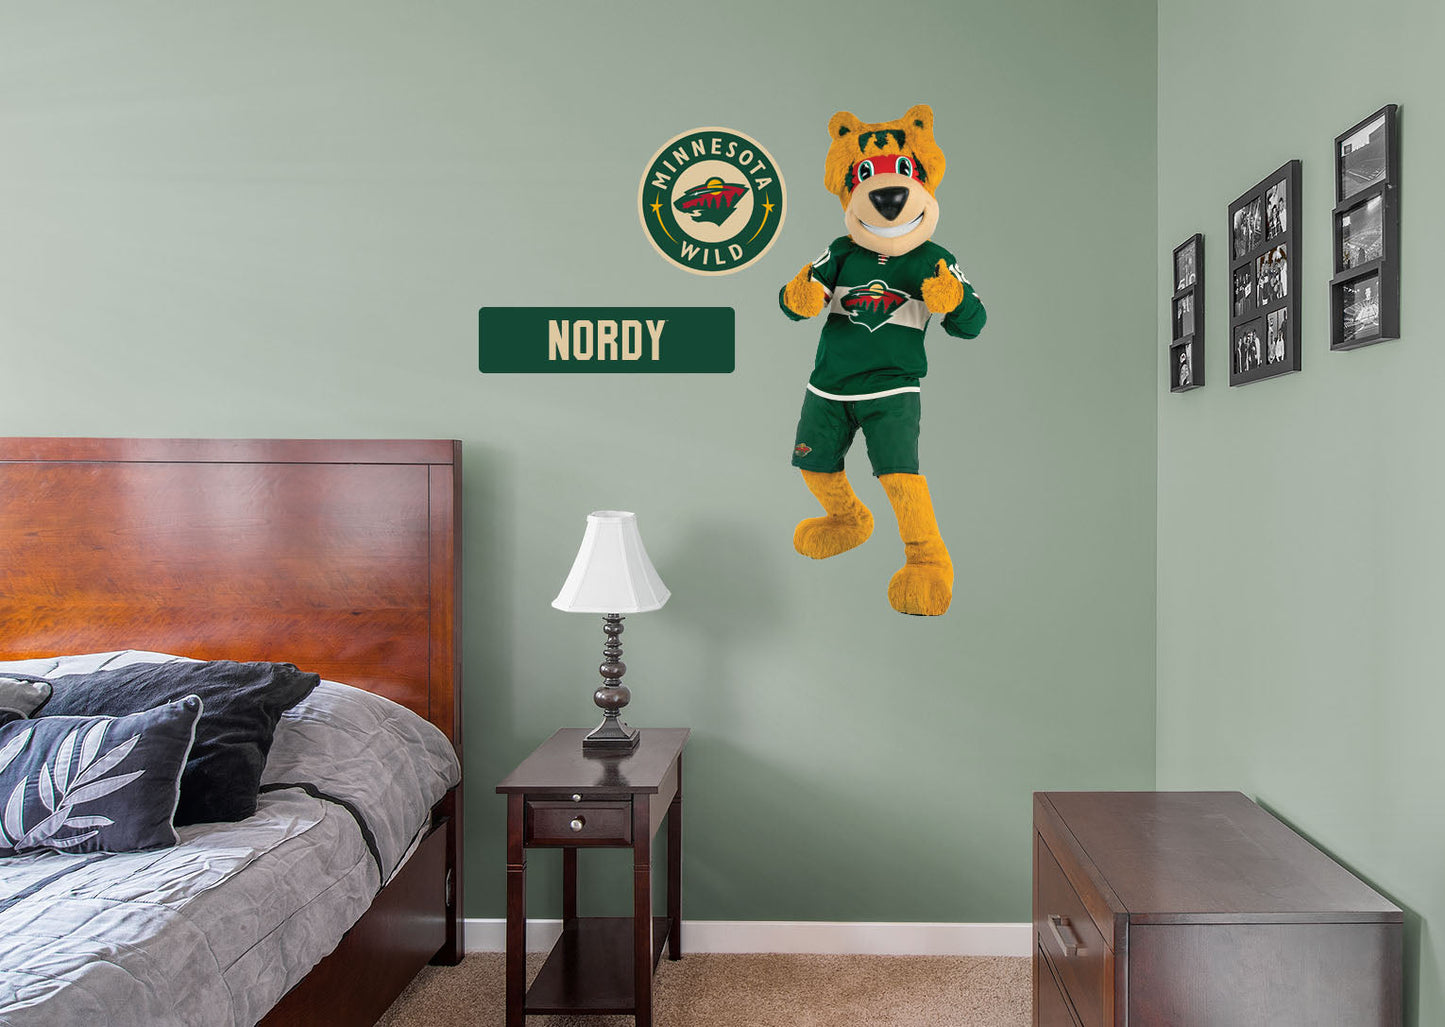 Minnesota Wild: Nordy  Mascot        - Officially Licensed NHL Removable Wall   Adhesive Decal